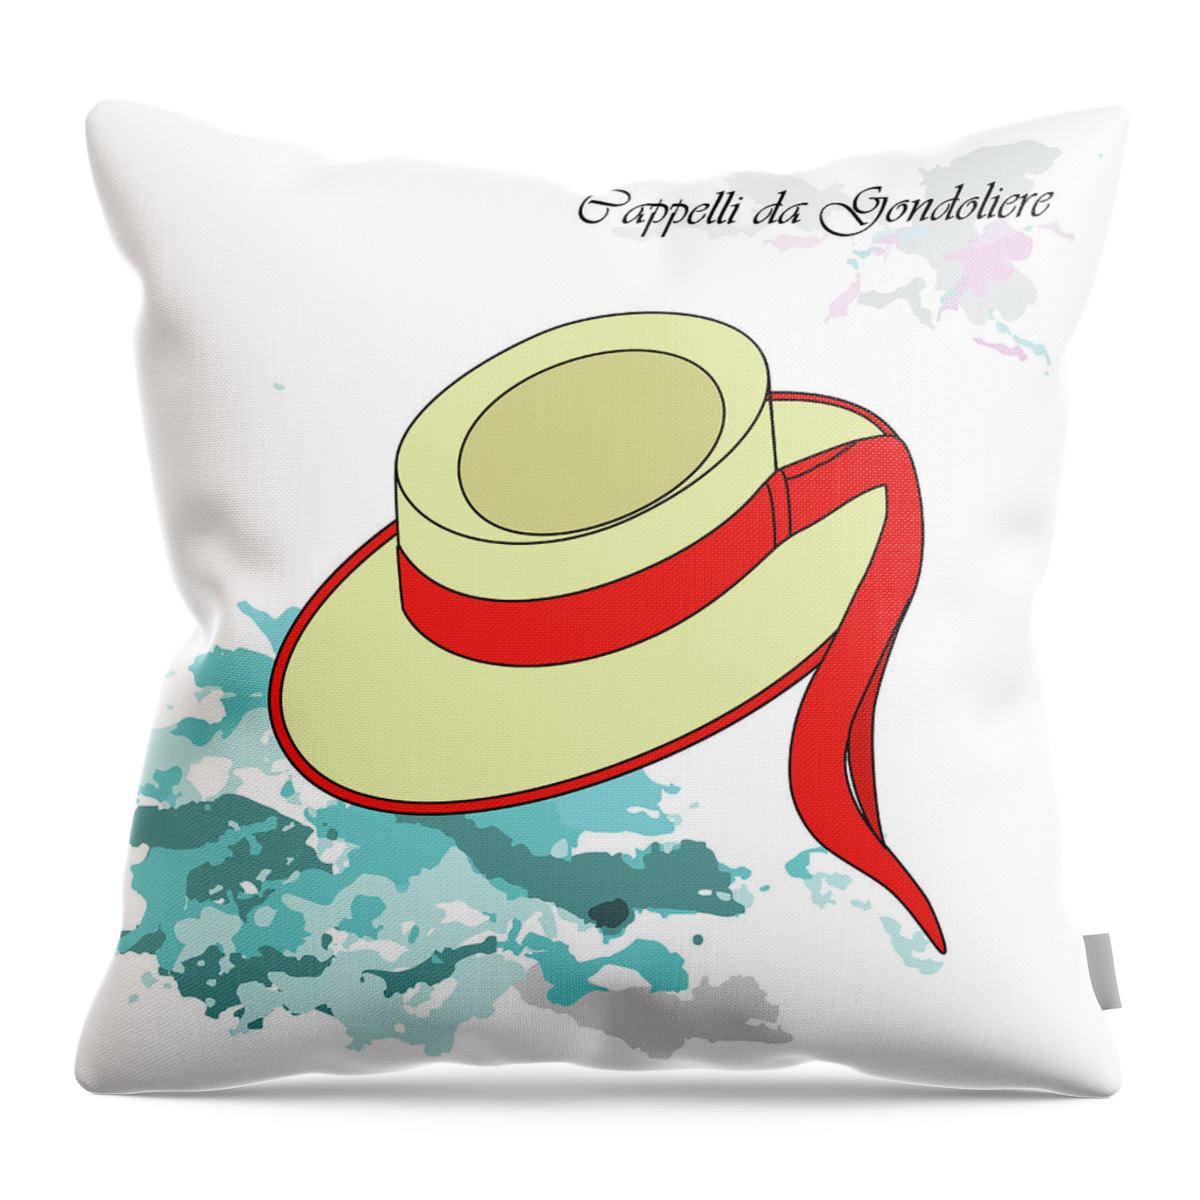 Venice Throw Pillow featuring the digital art Traditional hat of gondolier by Marina Usmanskaya